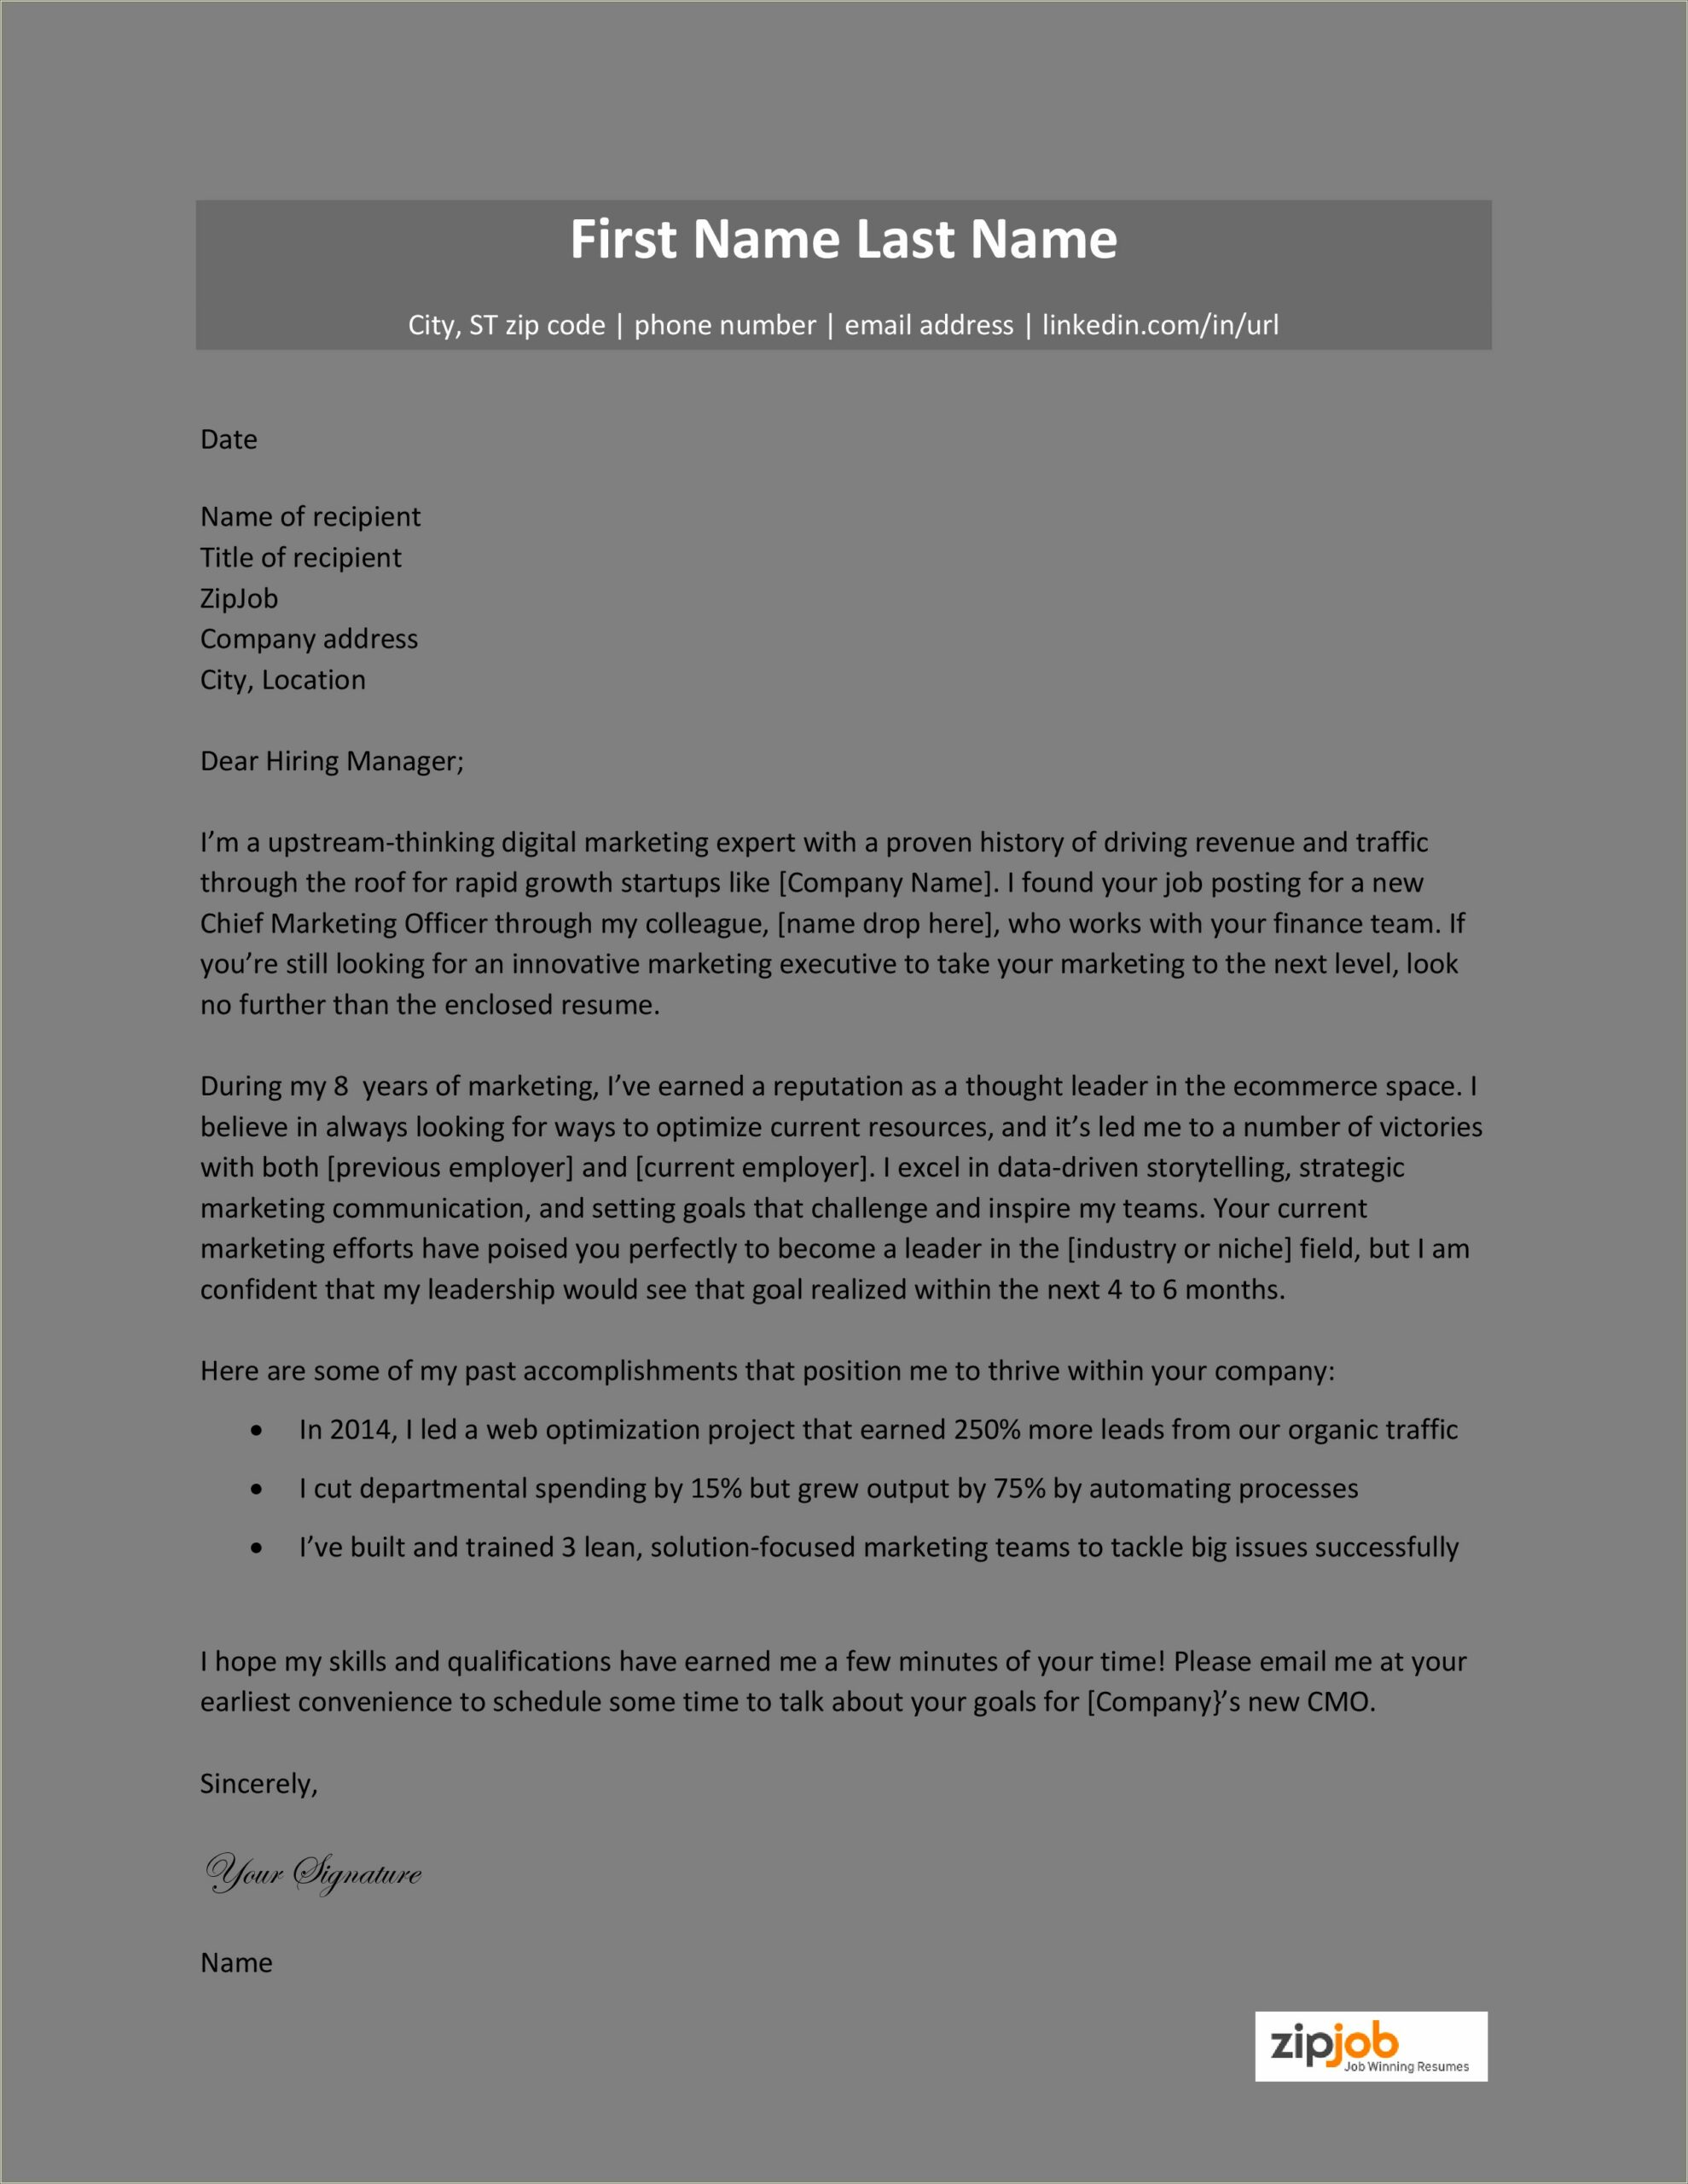 Emailing Resume And Cover Letter Message Sample